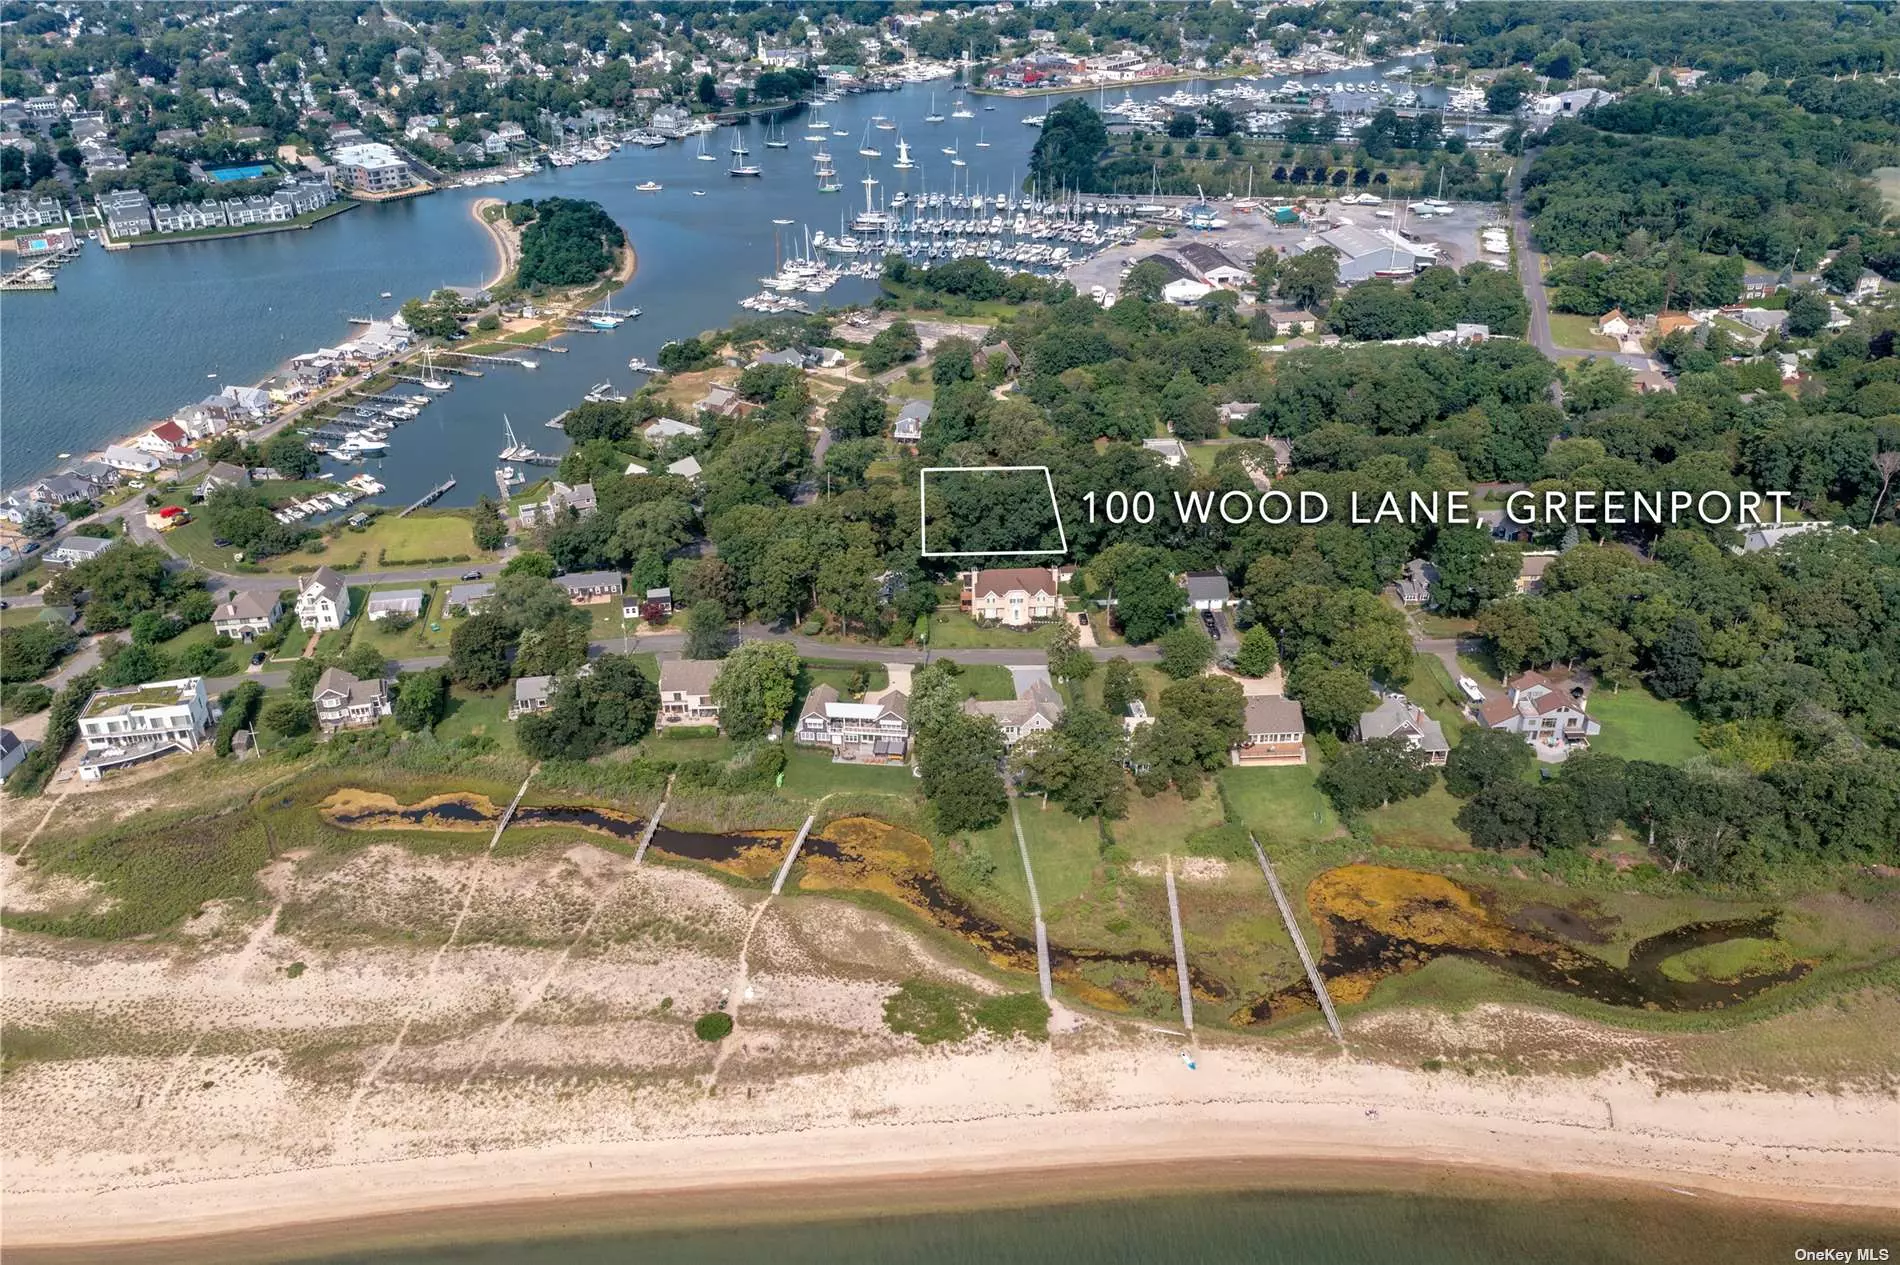 Located less than a mere 500 feet from a sandy bay beach, this quarter acre flat parcel of land gives you immediate access to all of the amenities Greenport Village and the North Fork have to offer. Whether your mode of transportation be a vehicle, motor boat, sailboat, paddle board, or bicycle, you can use any method of transport to get to renowned restaurants, wineries, boutique stores, farm stands and Mitchel Park and Marina in the heart of Greenport Village. .